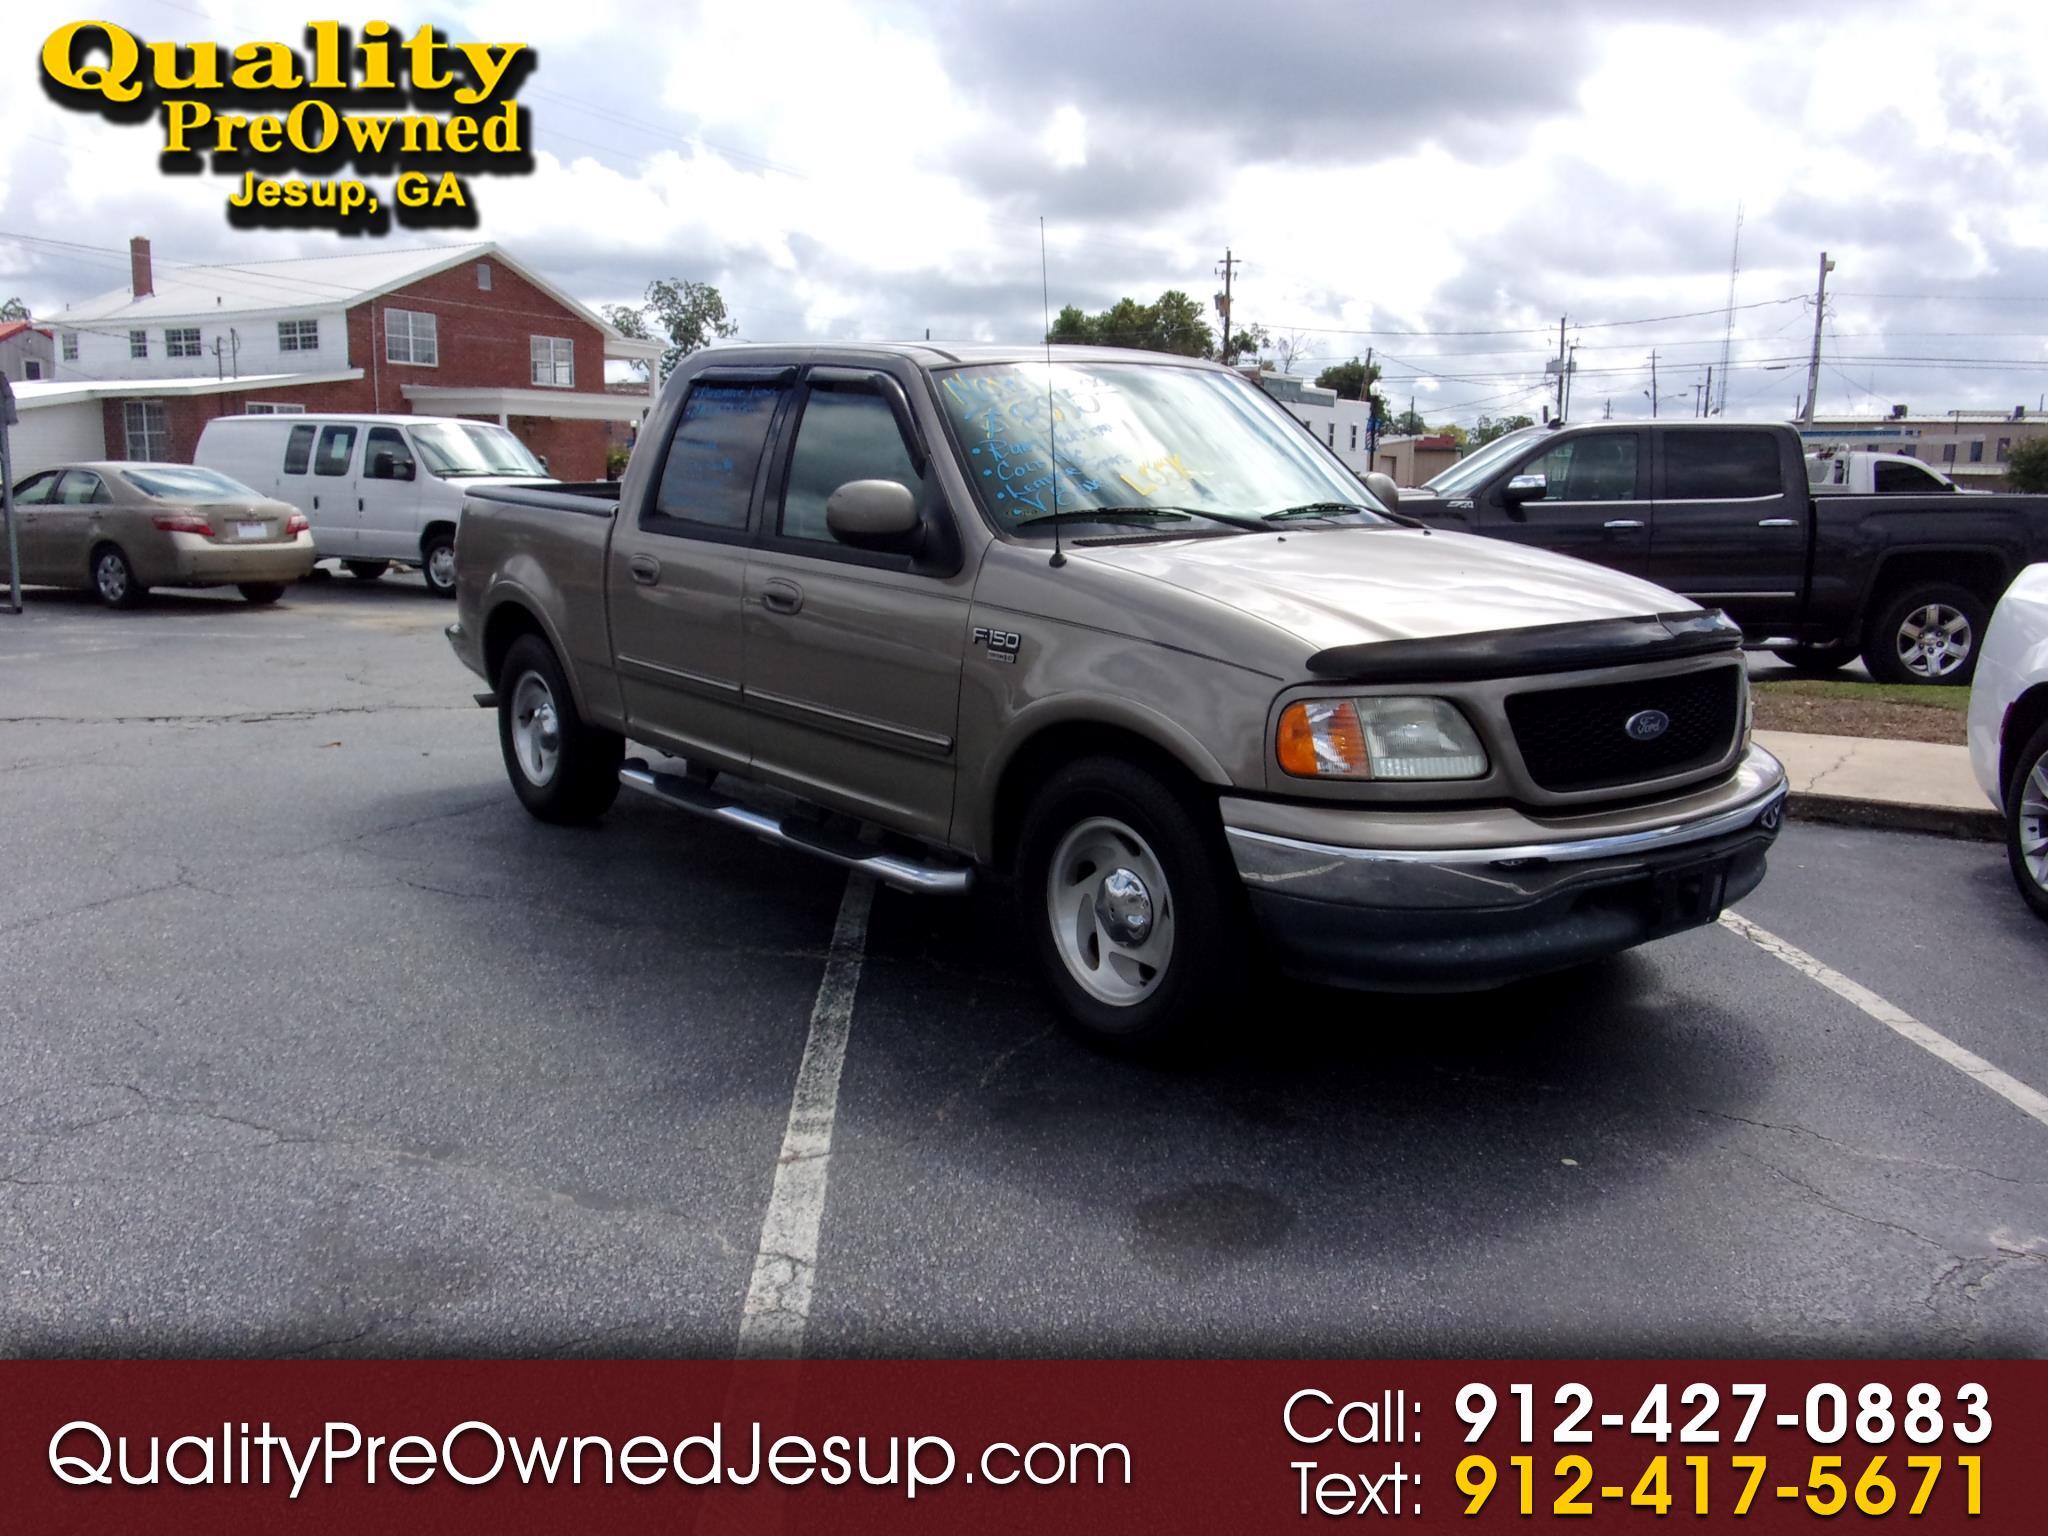 Used 2003 Ford F-150 SuperCrew 139" King Ranch for Sale in Jesup GA 2003 Ford E 150 Towing Capacity